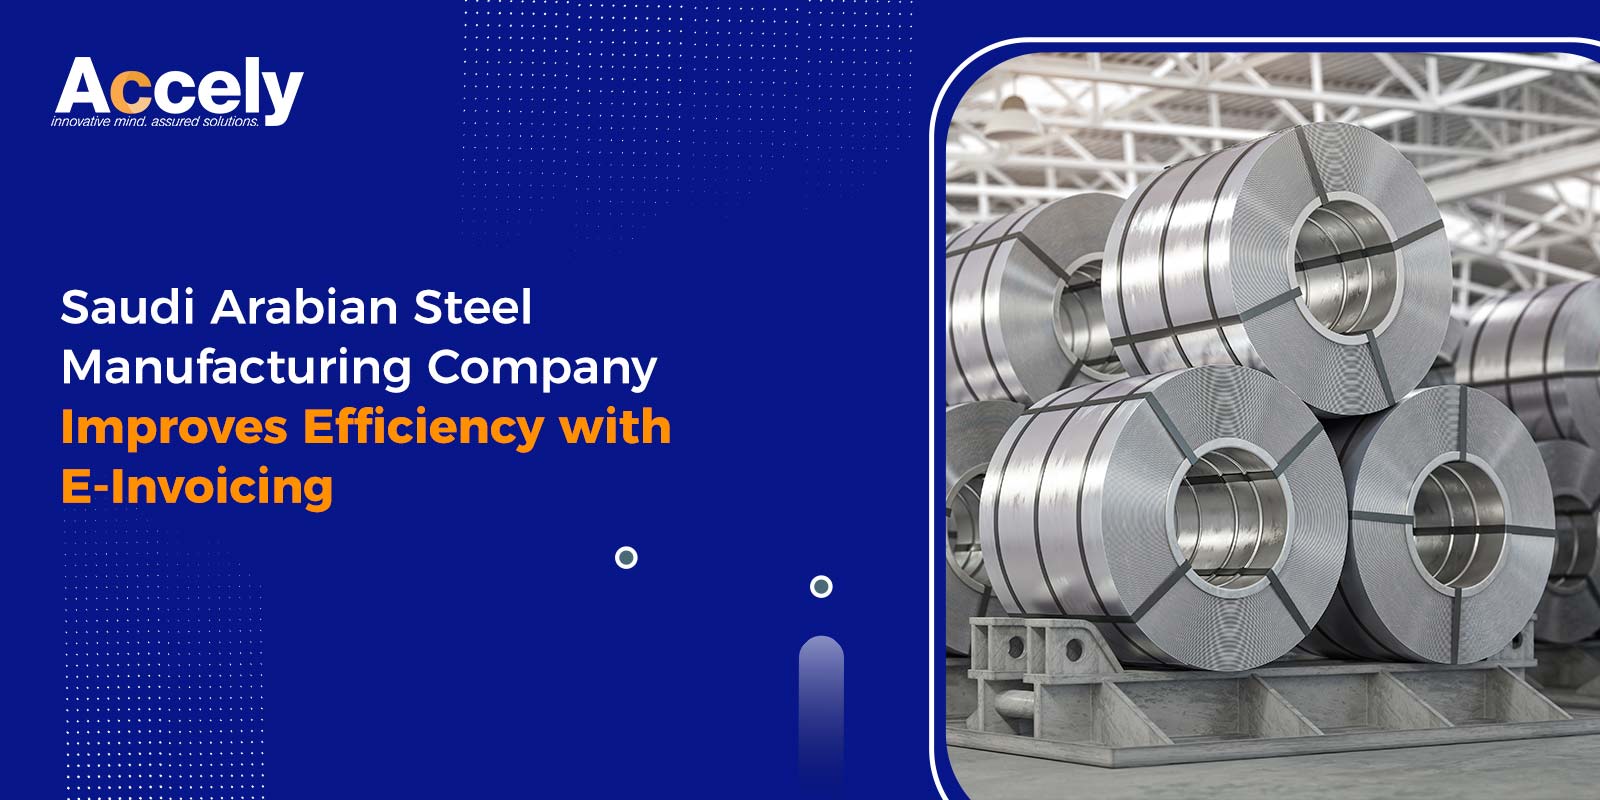 Saudi Arabian Steel Manufacturing Company Improves Efficiency with E-Invoicing